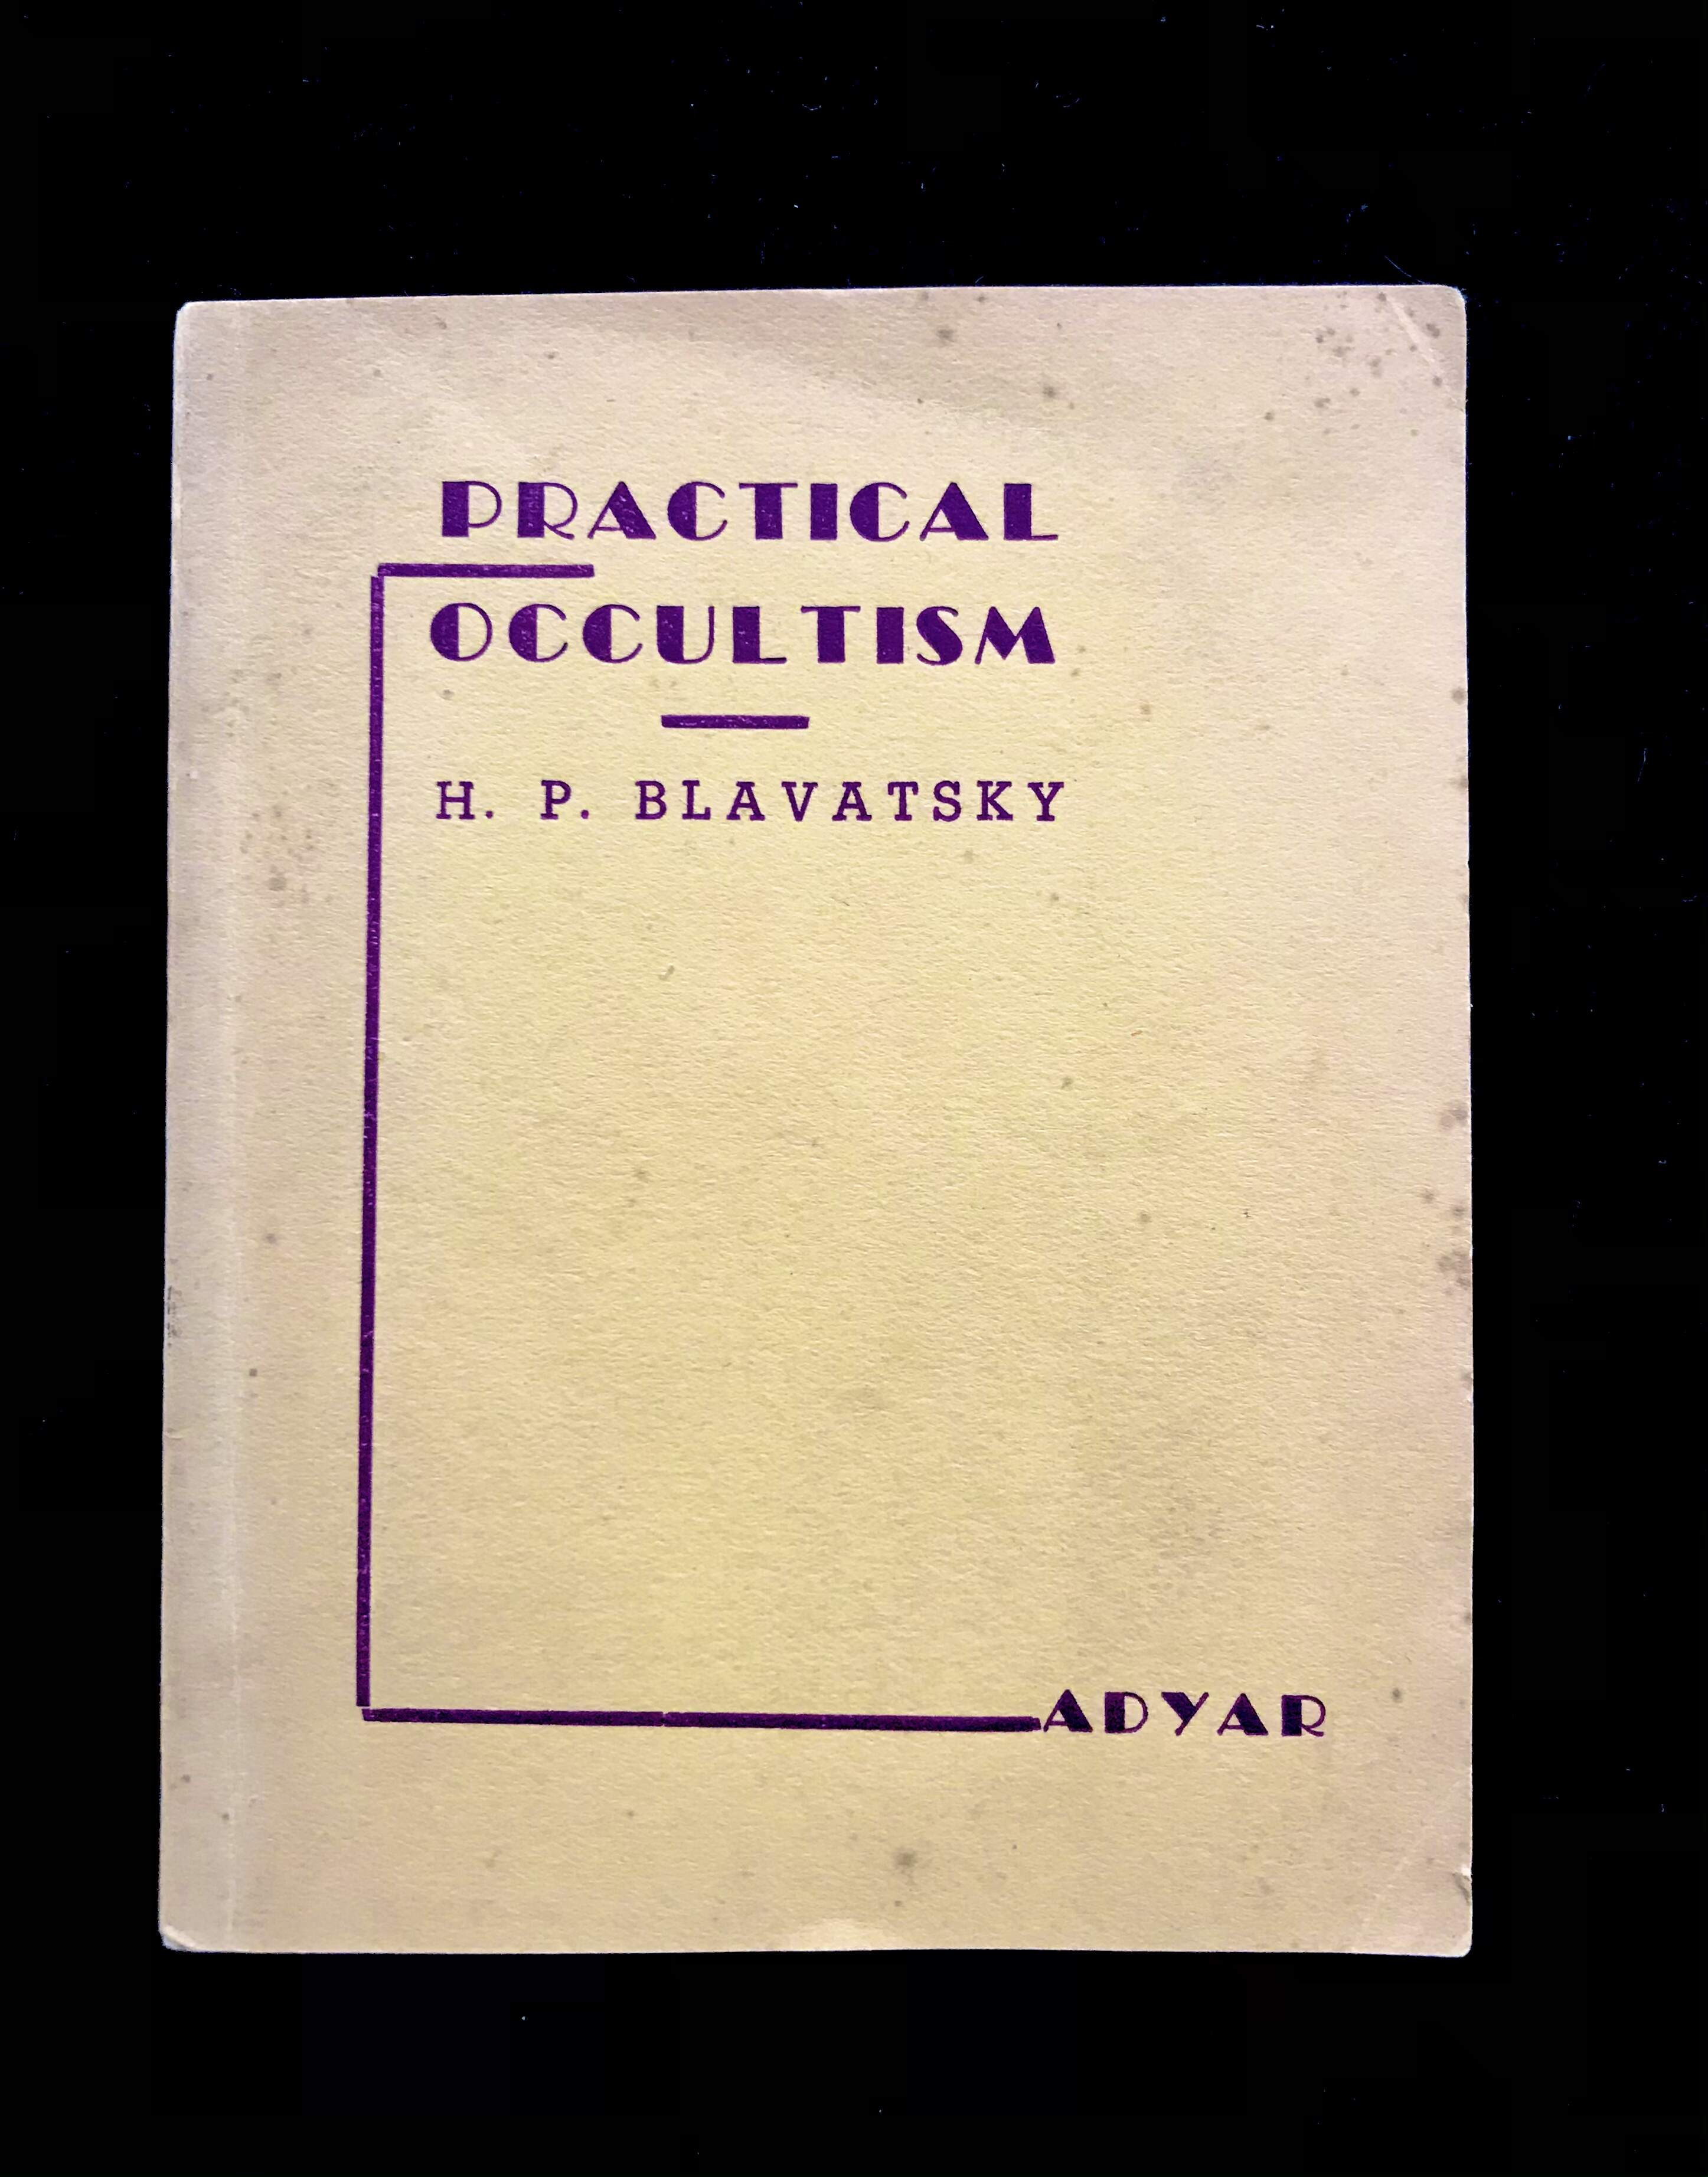 Practical Occultism by H. P. Blavatsky